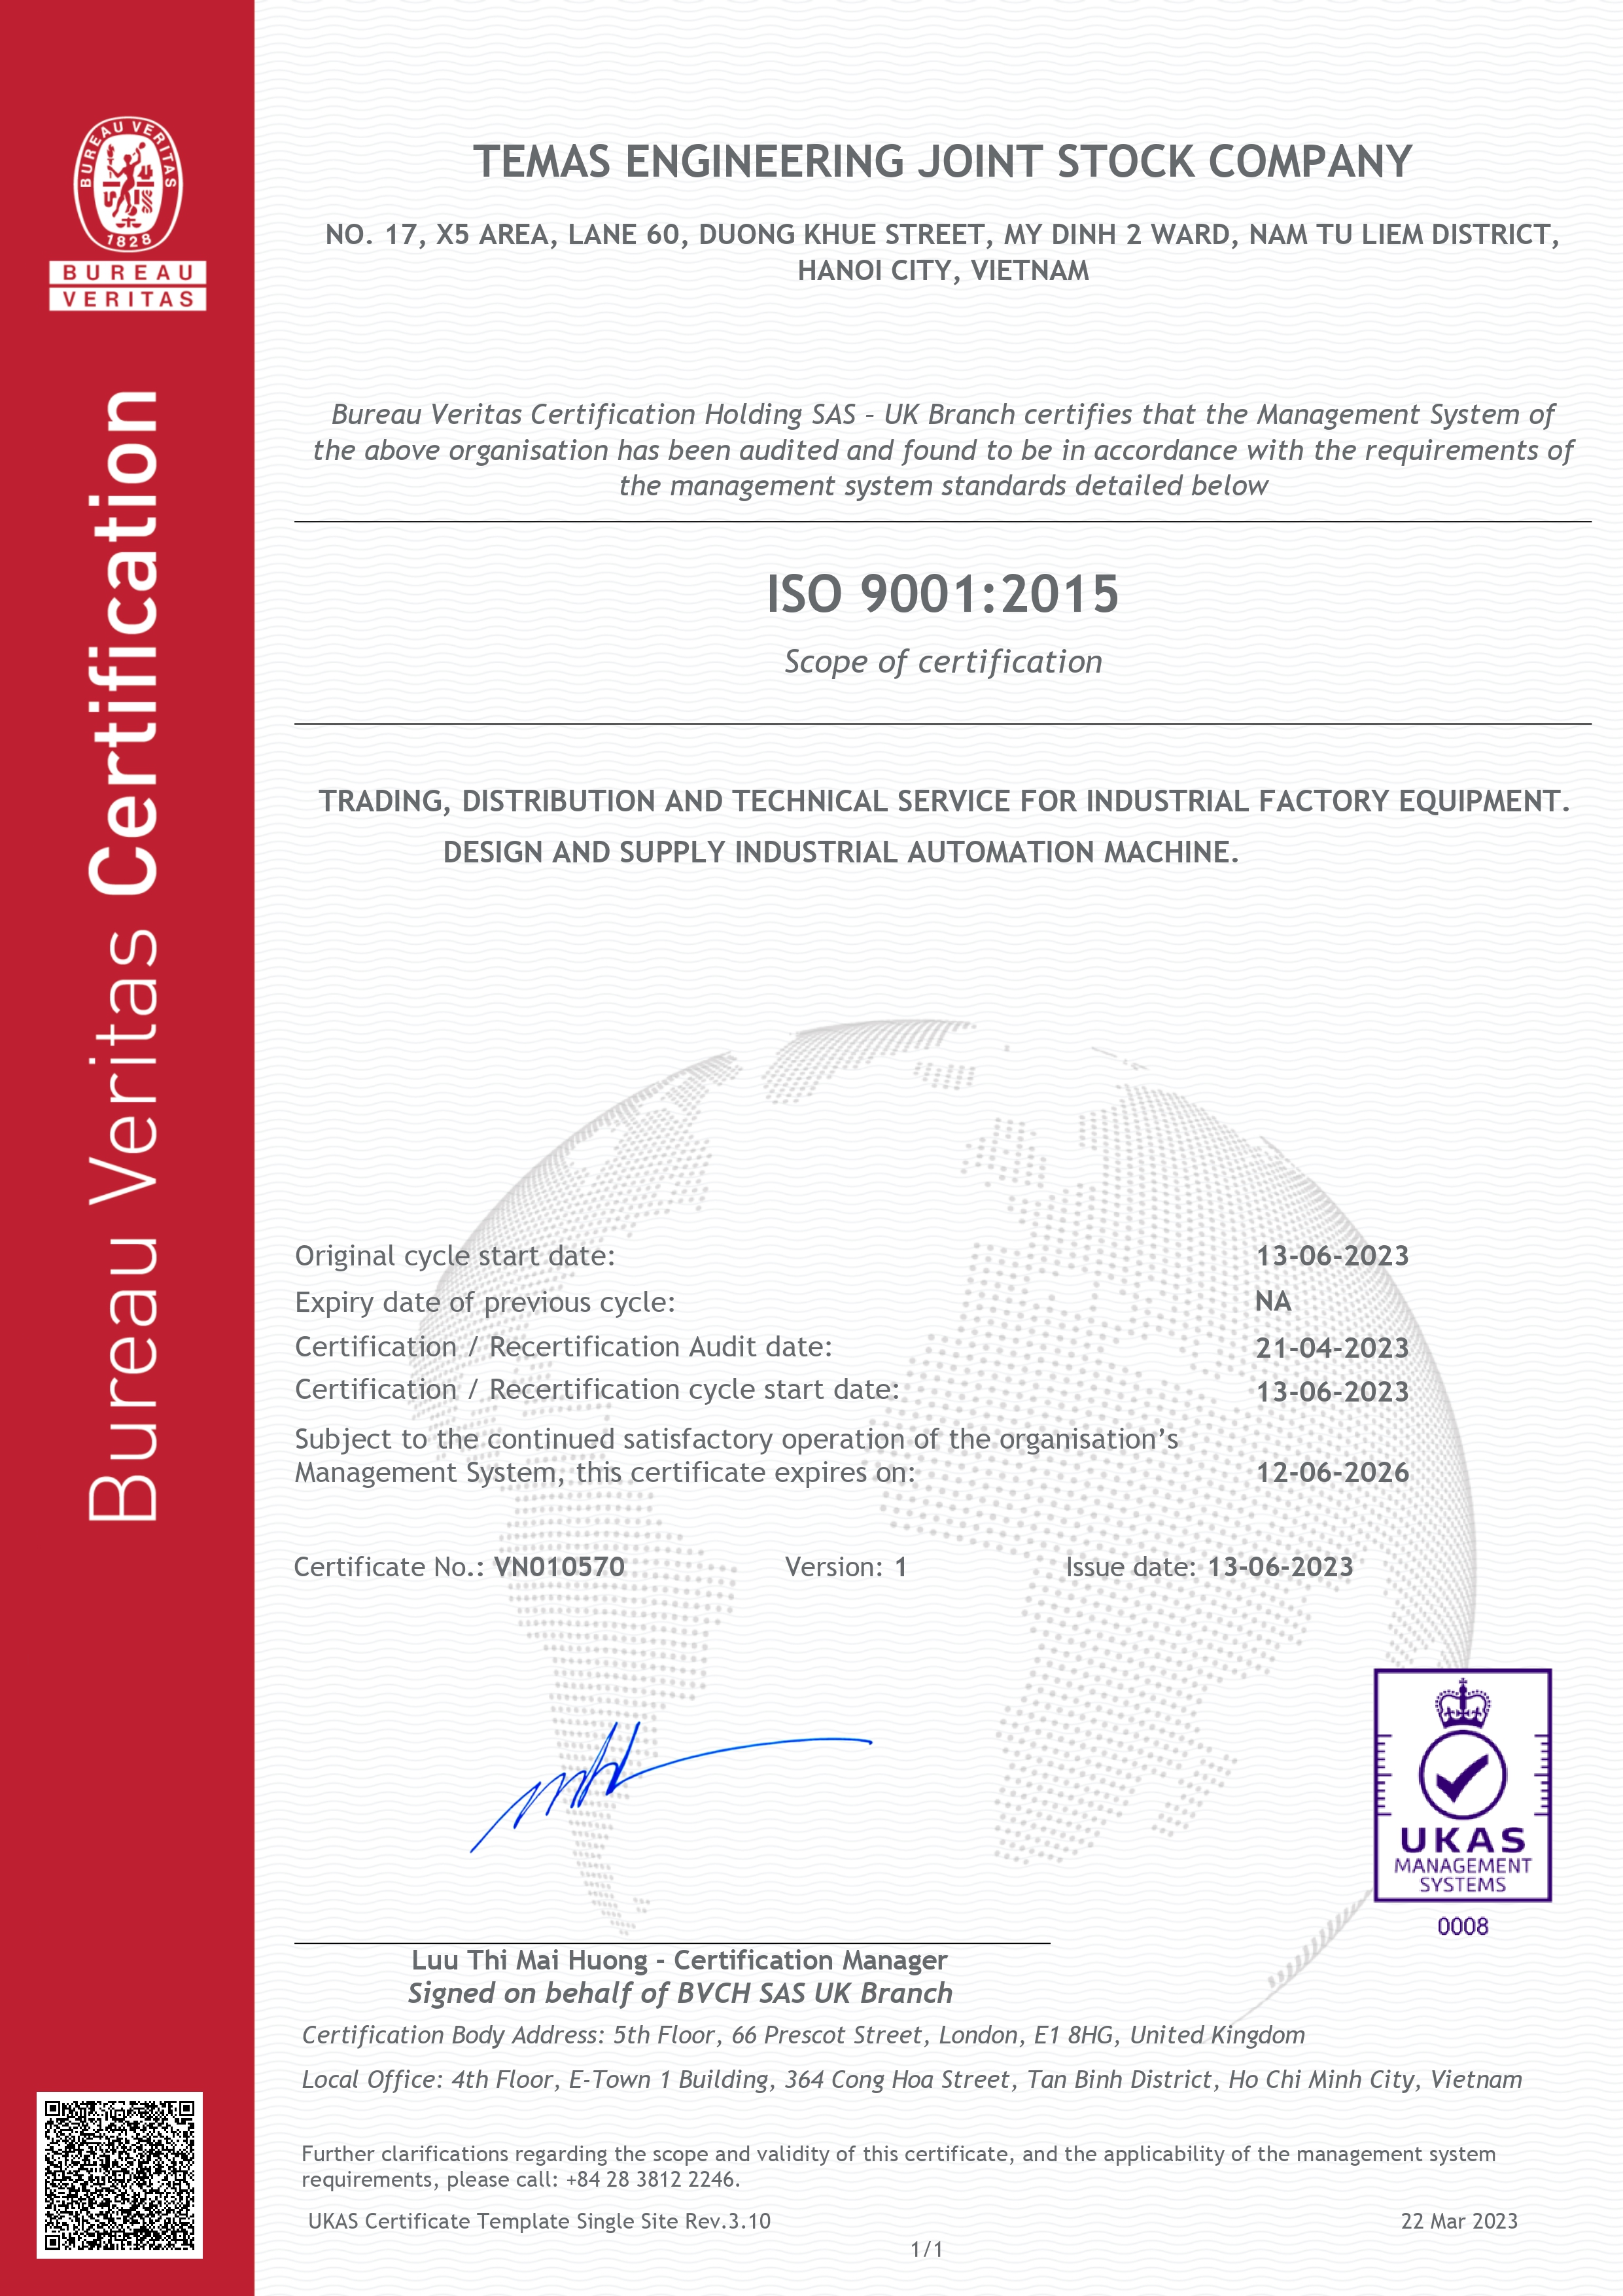 ISO 9001:2015 [/br] Quality Management Systems Certification